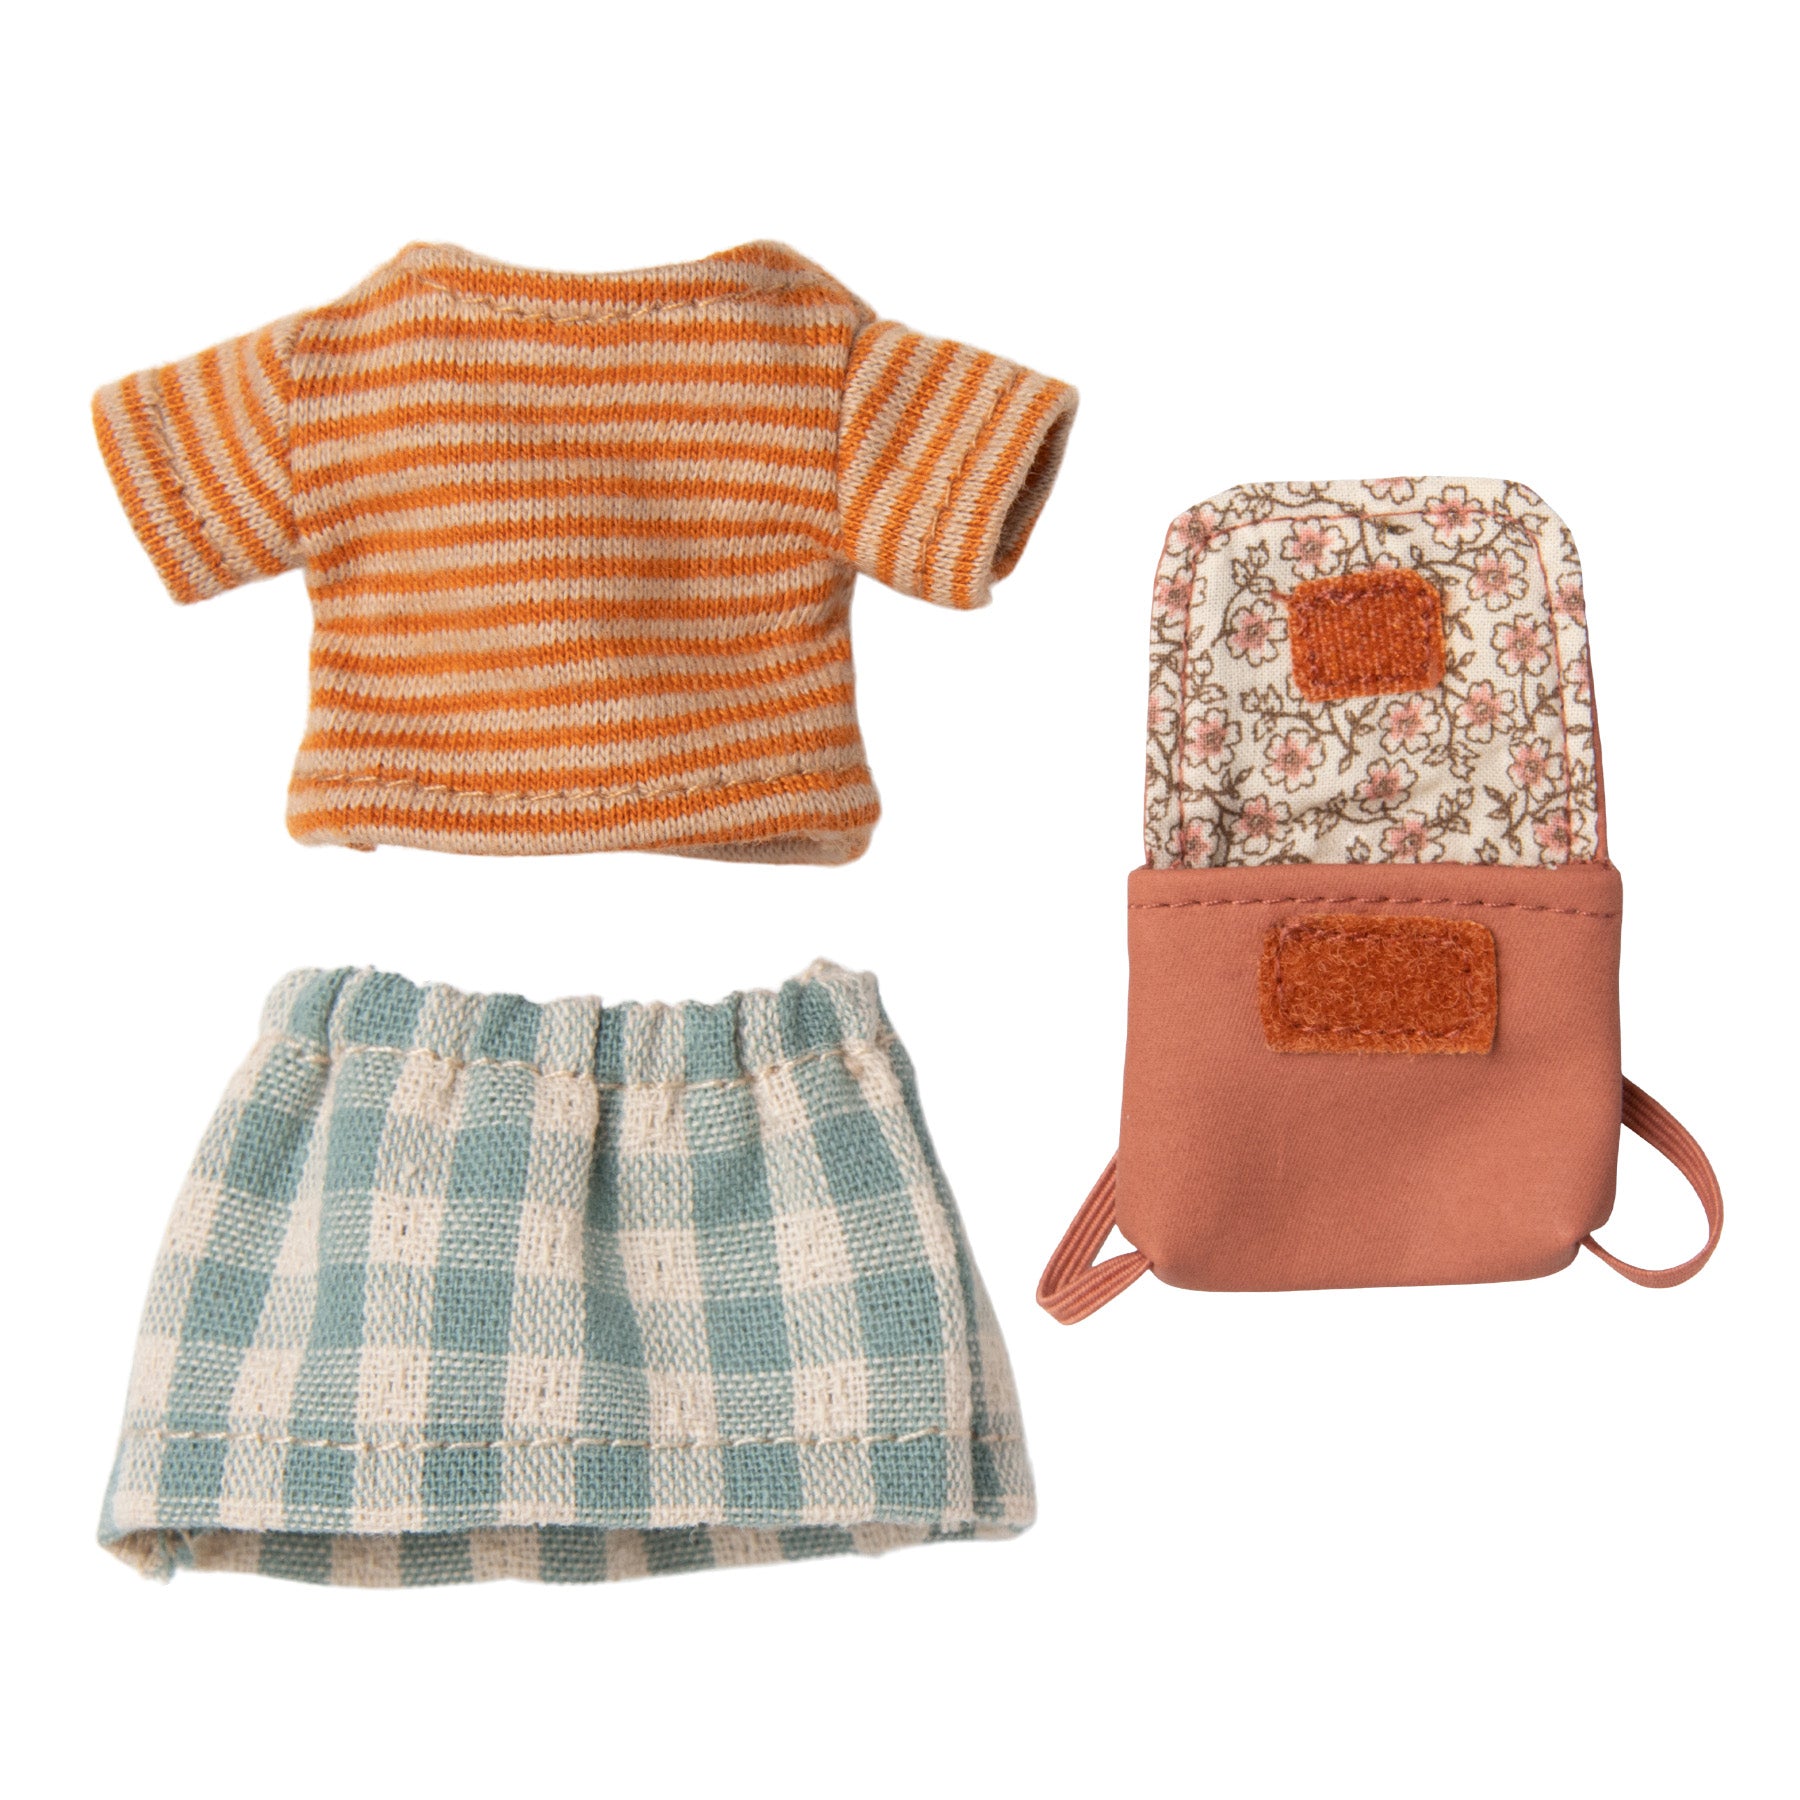 maileg mouse clothes - orange stripe jumper, check skirt and coral rucksack. These accessories are suitable for big sister mice